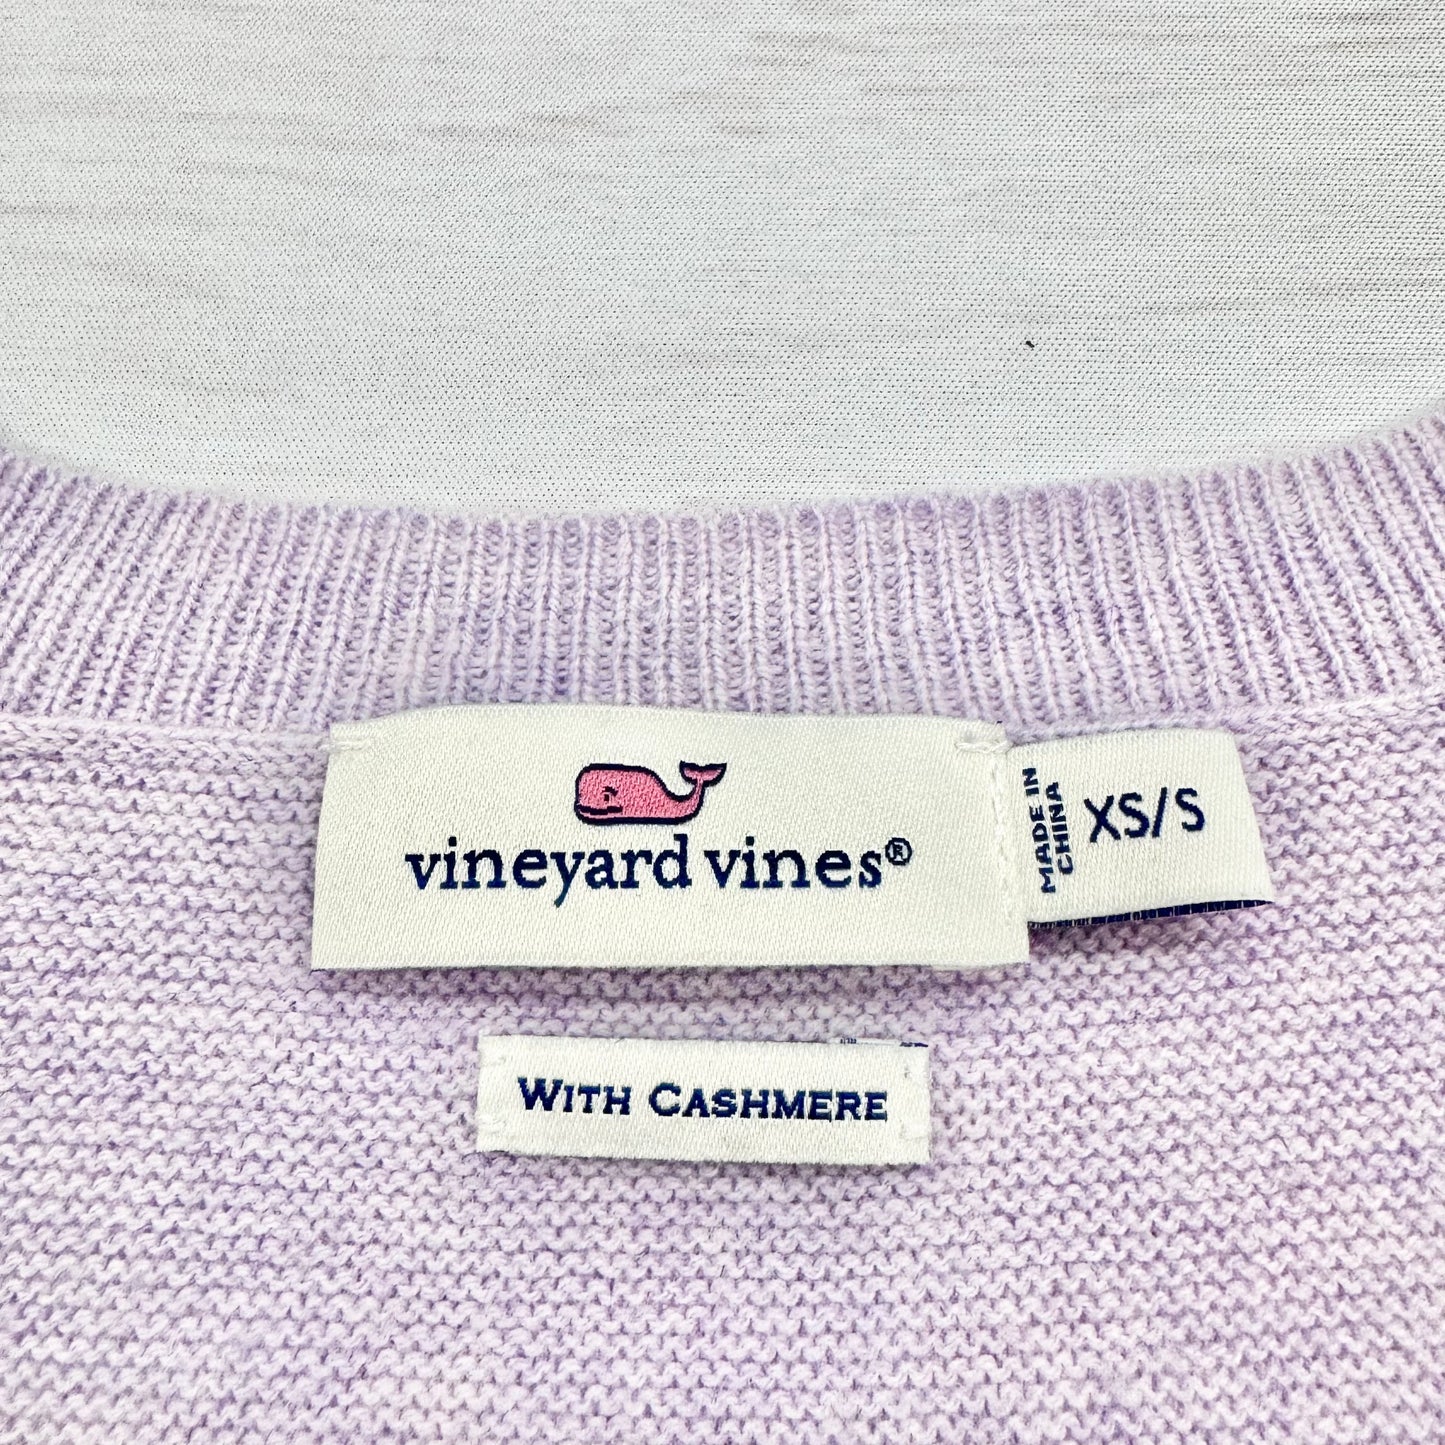 Sweater Cashmere By Vineyard Vines Size: XS/S